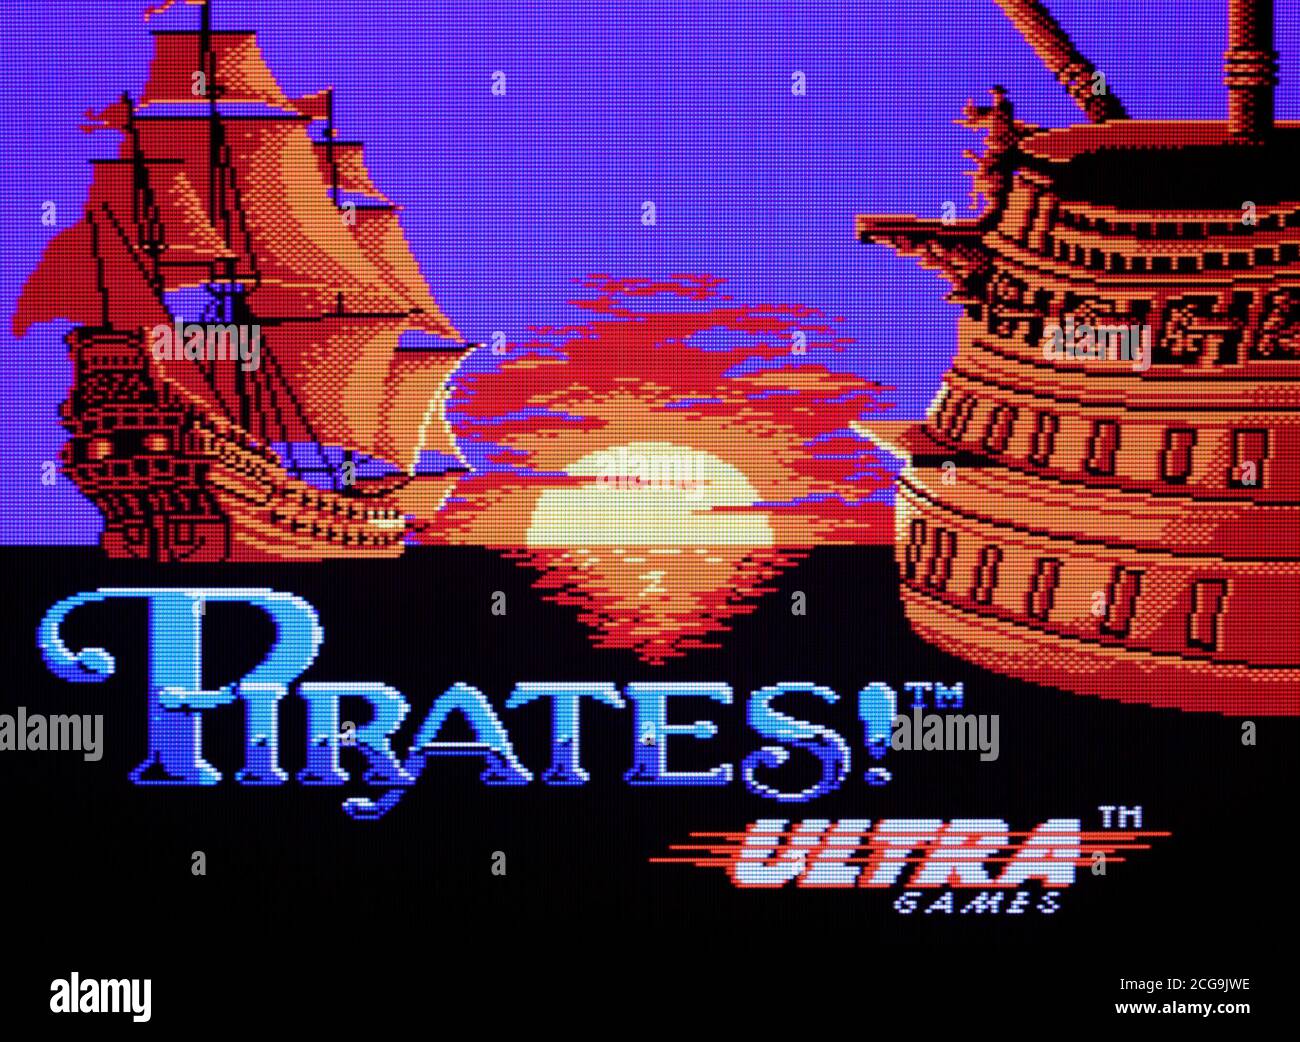 Pirates! - Nintendo Entertainment System - NES Videogame - Editorial use only Stock Photo